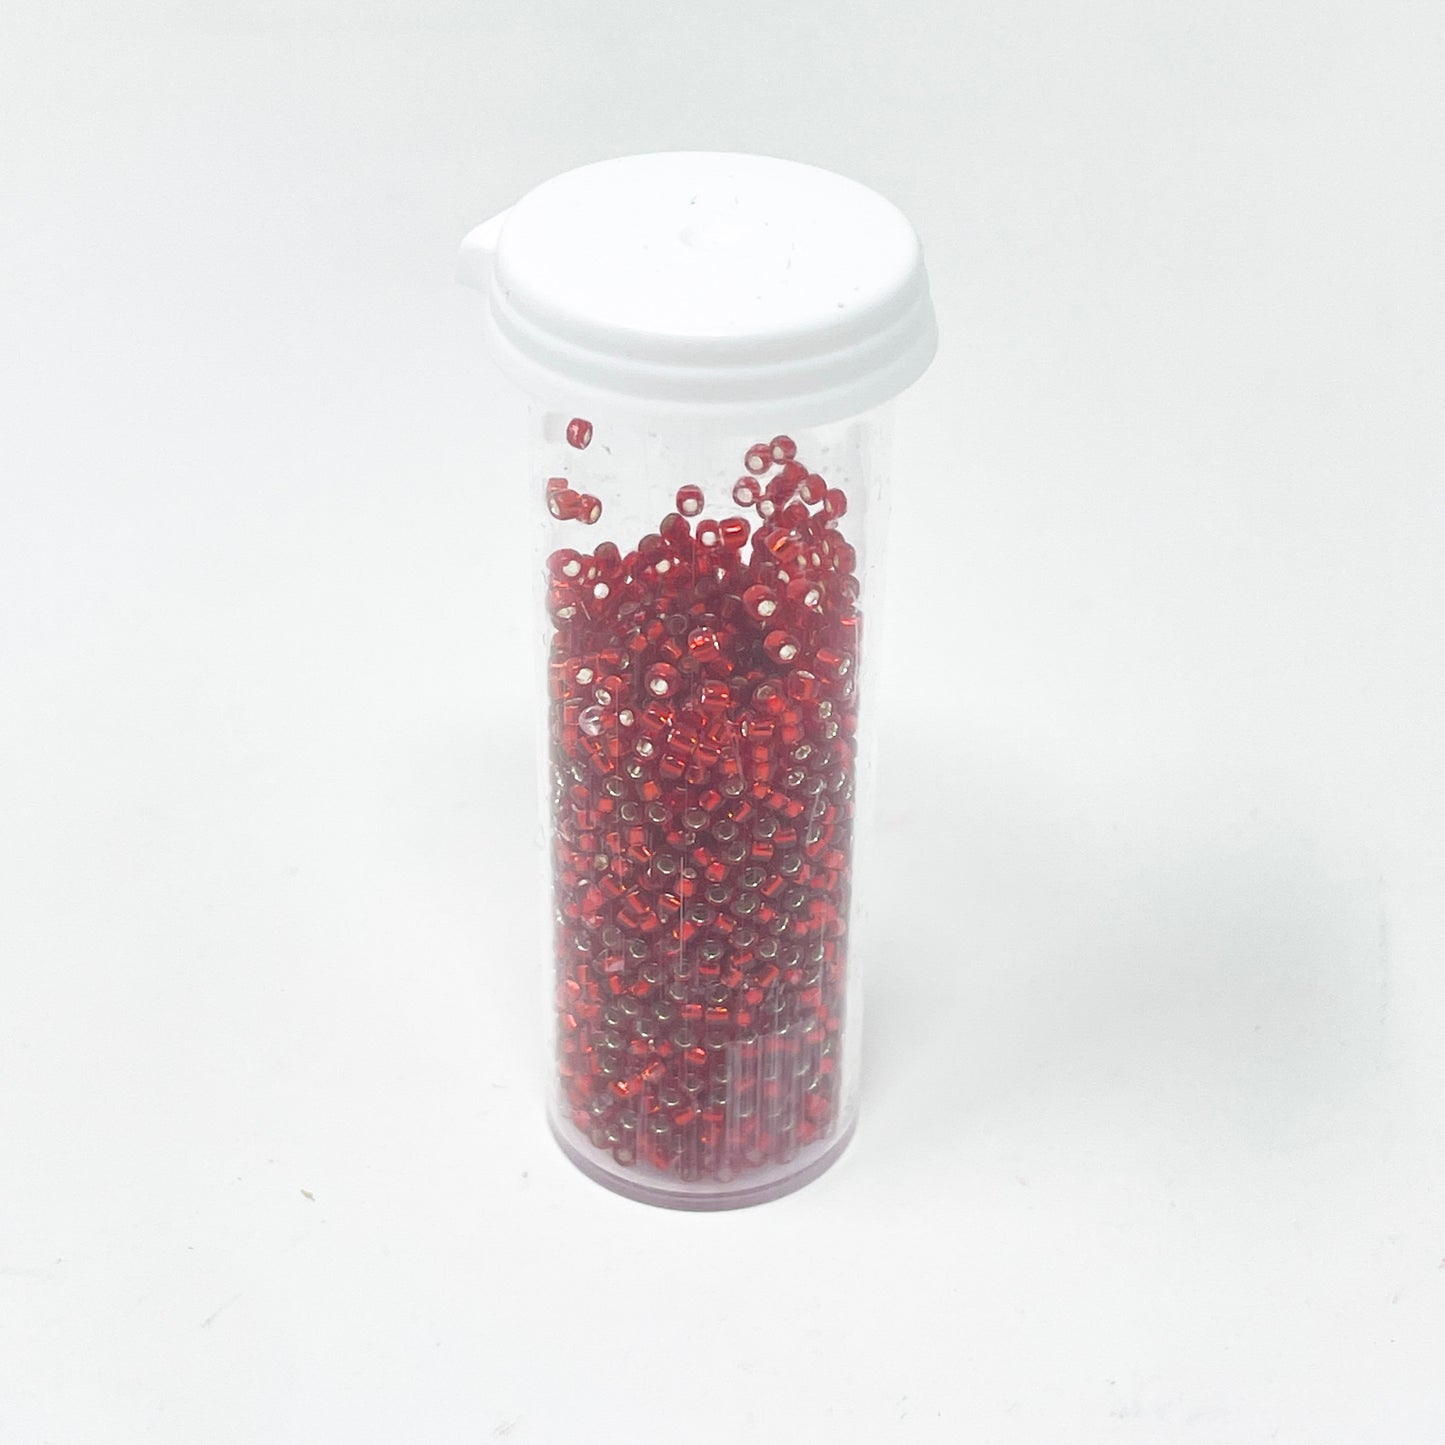 Mirrored Red Seed Beads - 7g